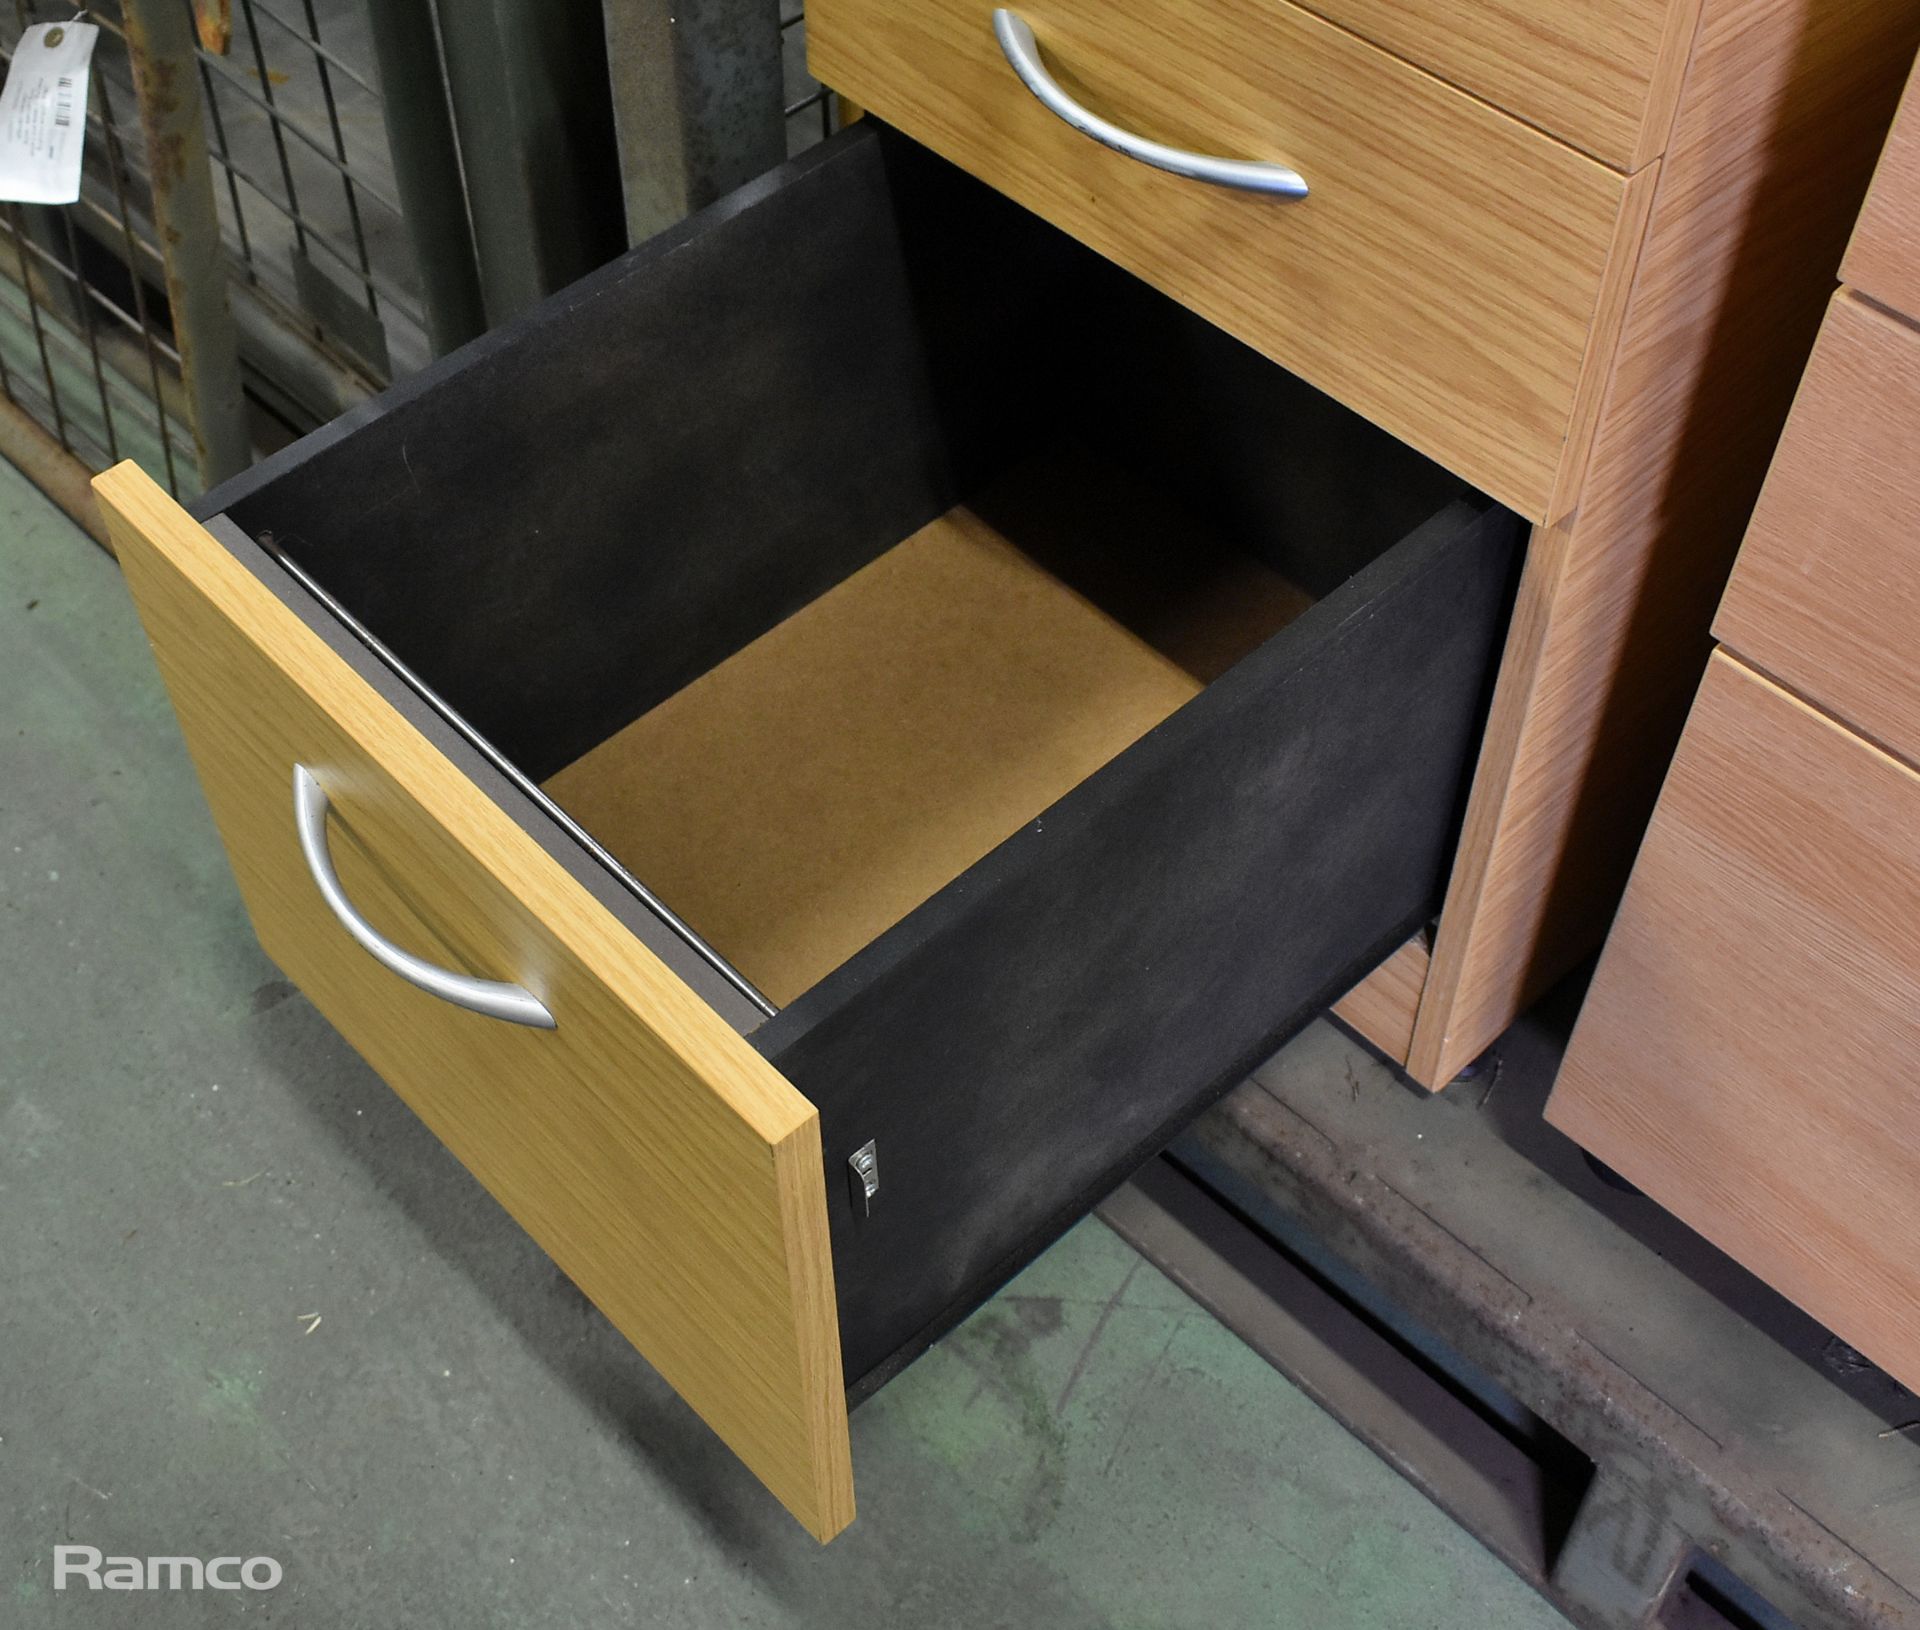 Office furniture including shelving, 2 desks and 2 small filing cabinets - some cosmetic damage - Image 4 of 9